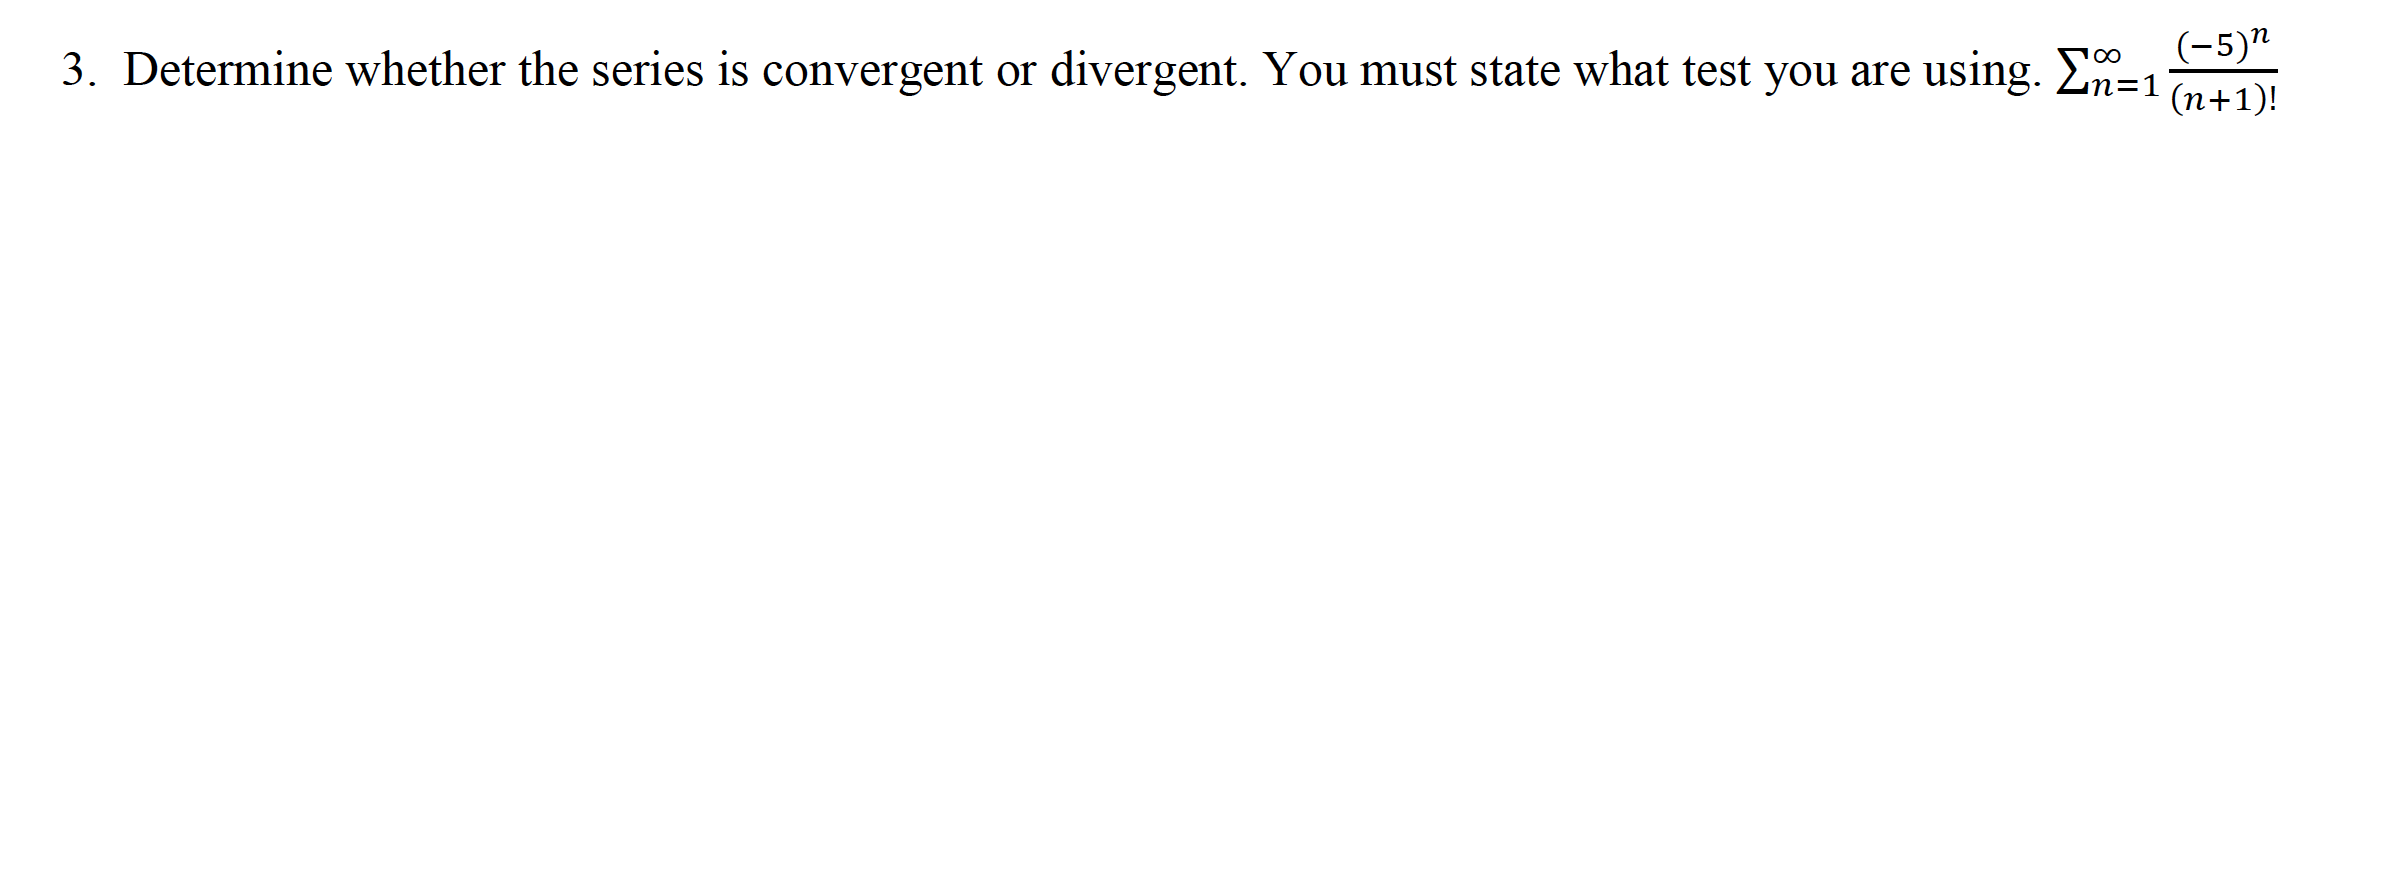 Determine whether the series is convergent or divergent. You must state what test you are using. En=1
(-5)"
(n+1)!
